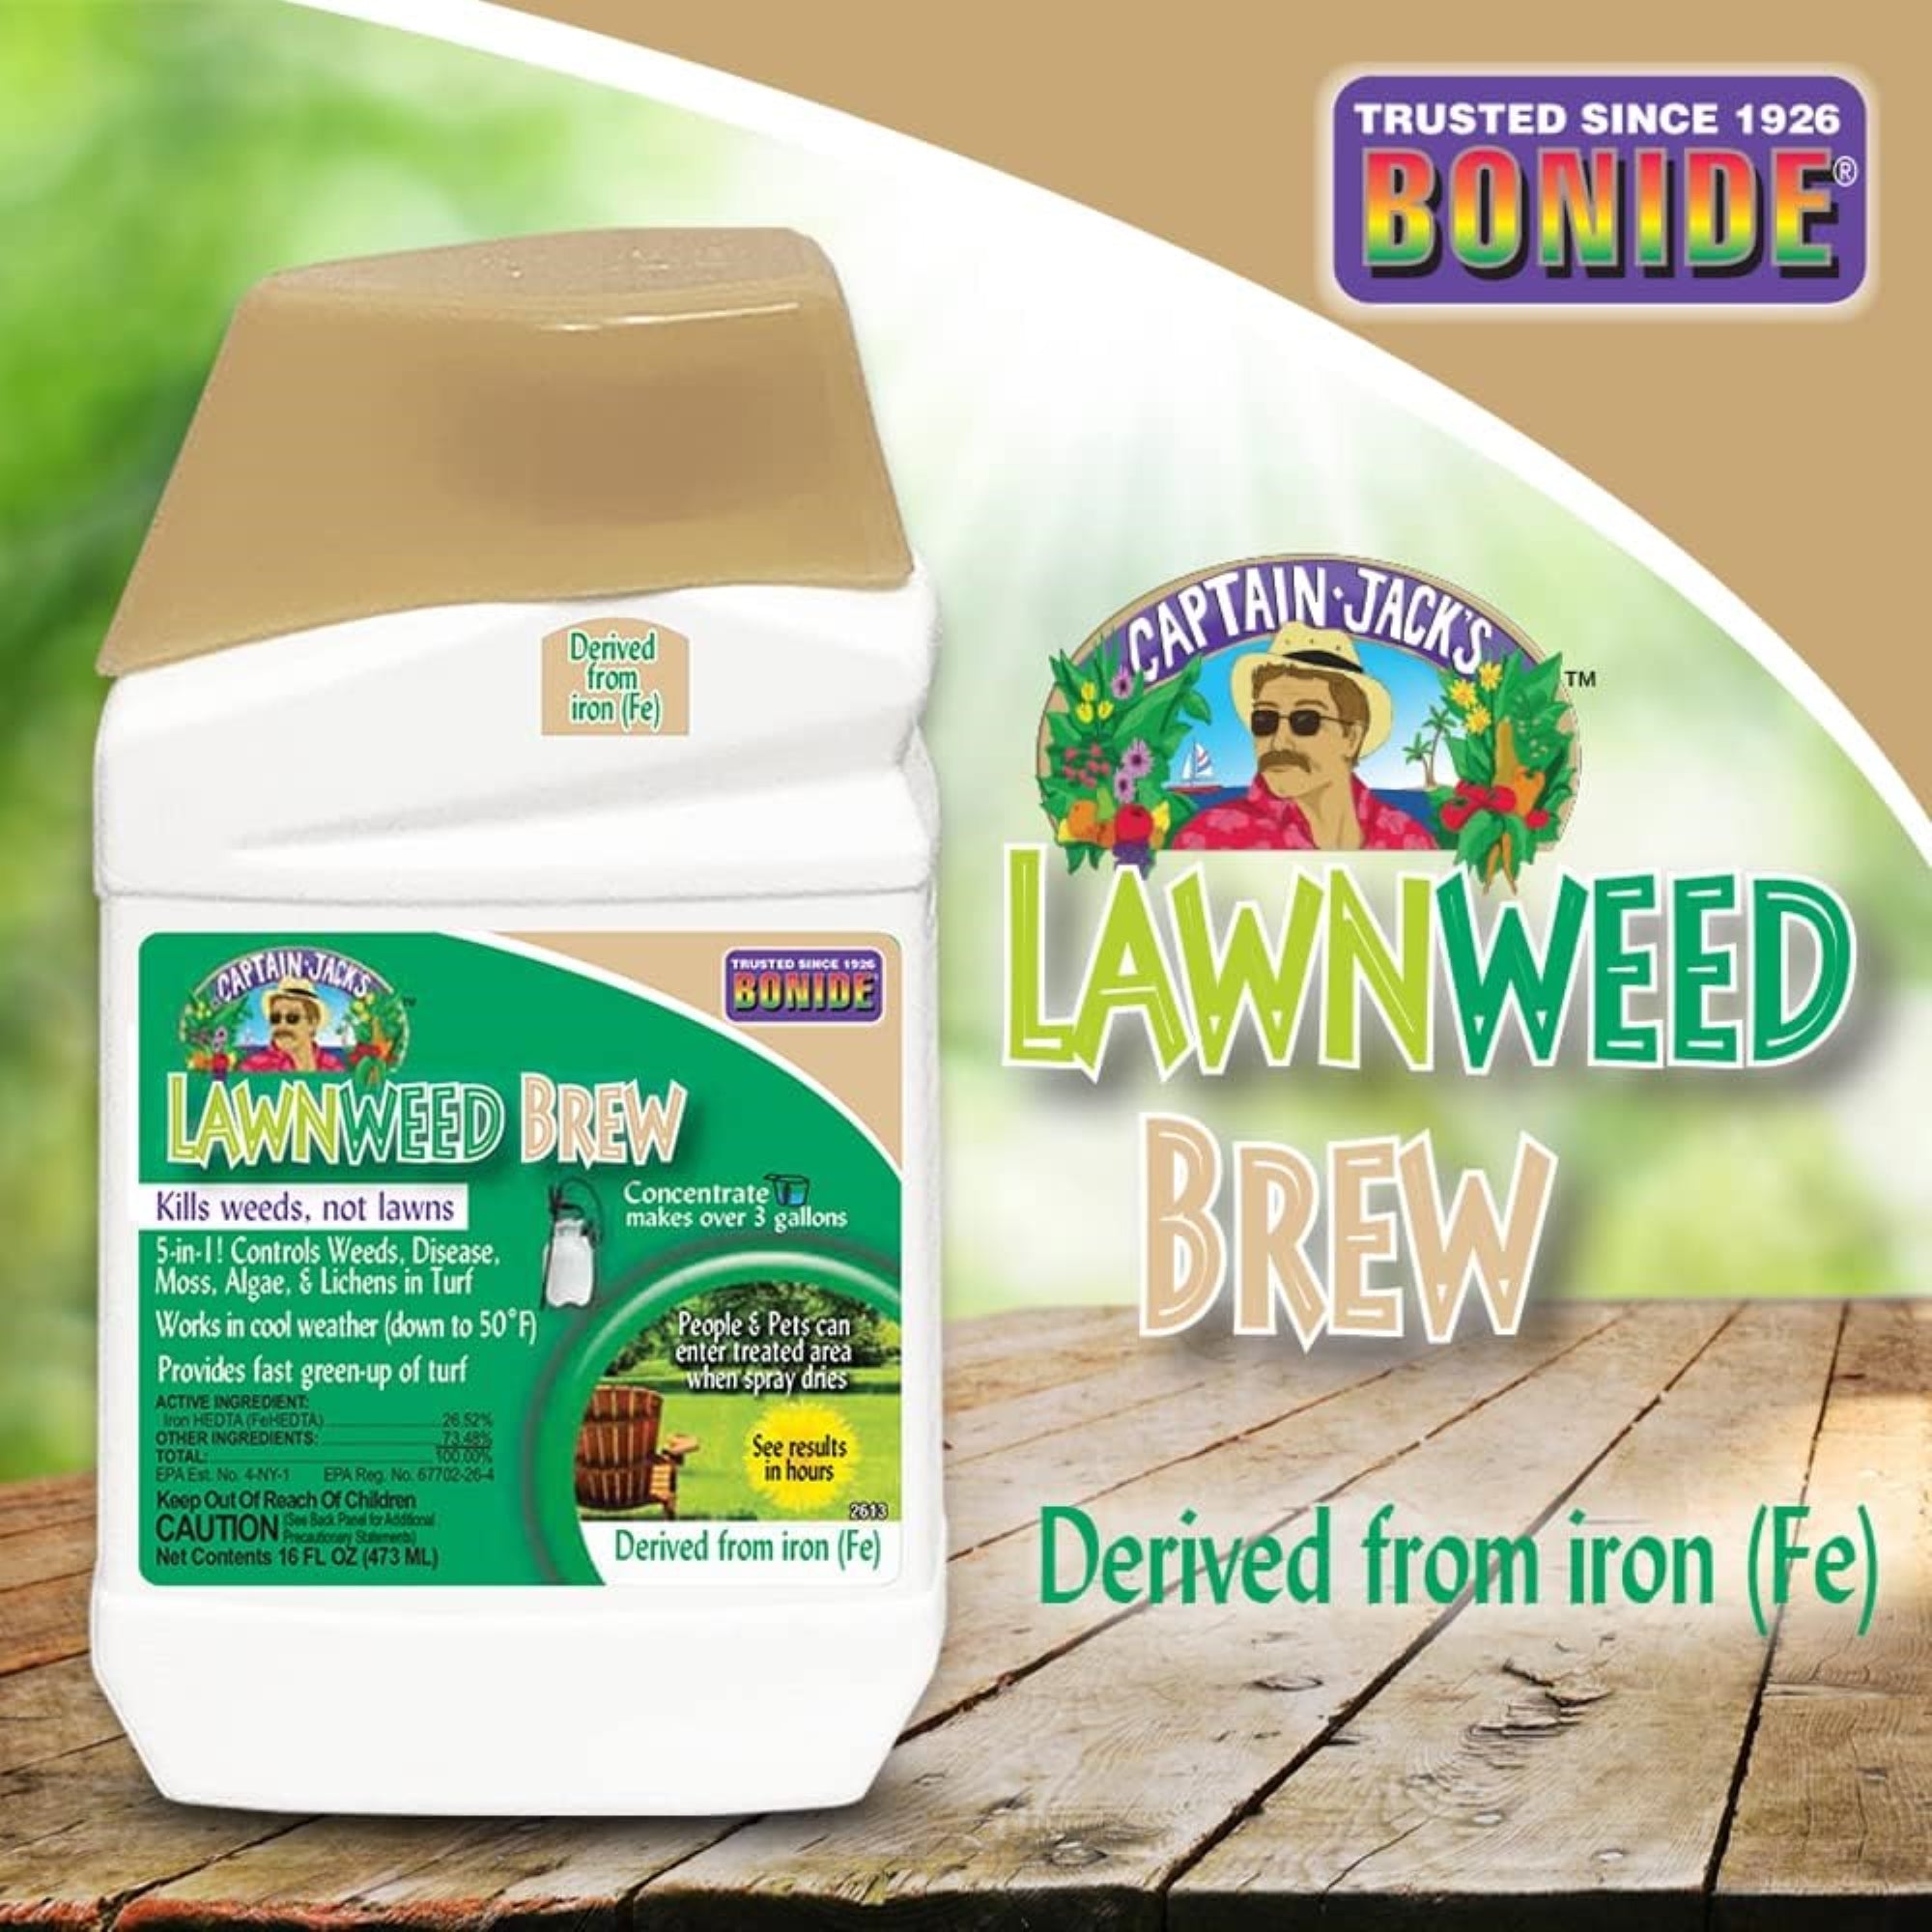 Bonide Captain Jack's Lawnweed Brew, Fast-Acting Formula Controls Weeds, Moss, Algae, Lichens & Disease, Concentrate, 16oz